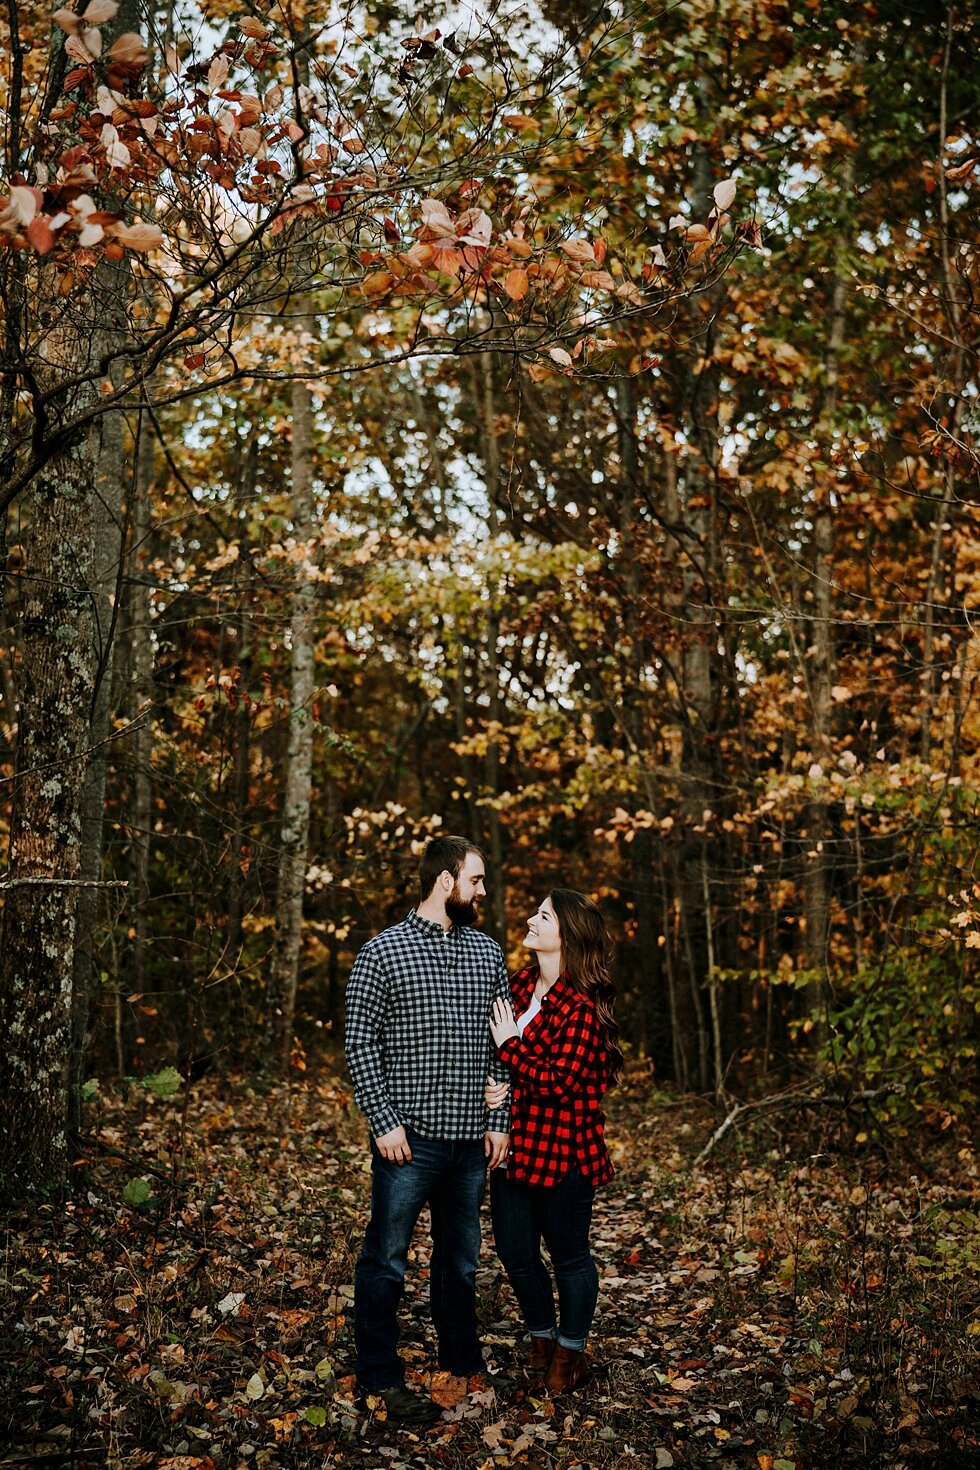  A little bit of green in the background made this bride to be’s sweater pop! #engagementgoals #engagementphotographer #engaged #outdoorengagement #kentuckyphotographer #indianaphotographer #louisvillephotographer #engagementphotos #savethedatephotos